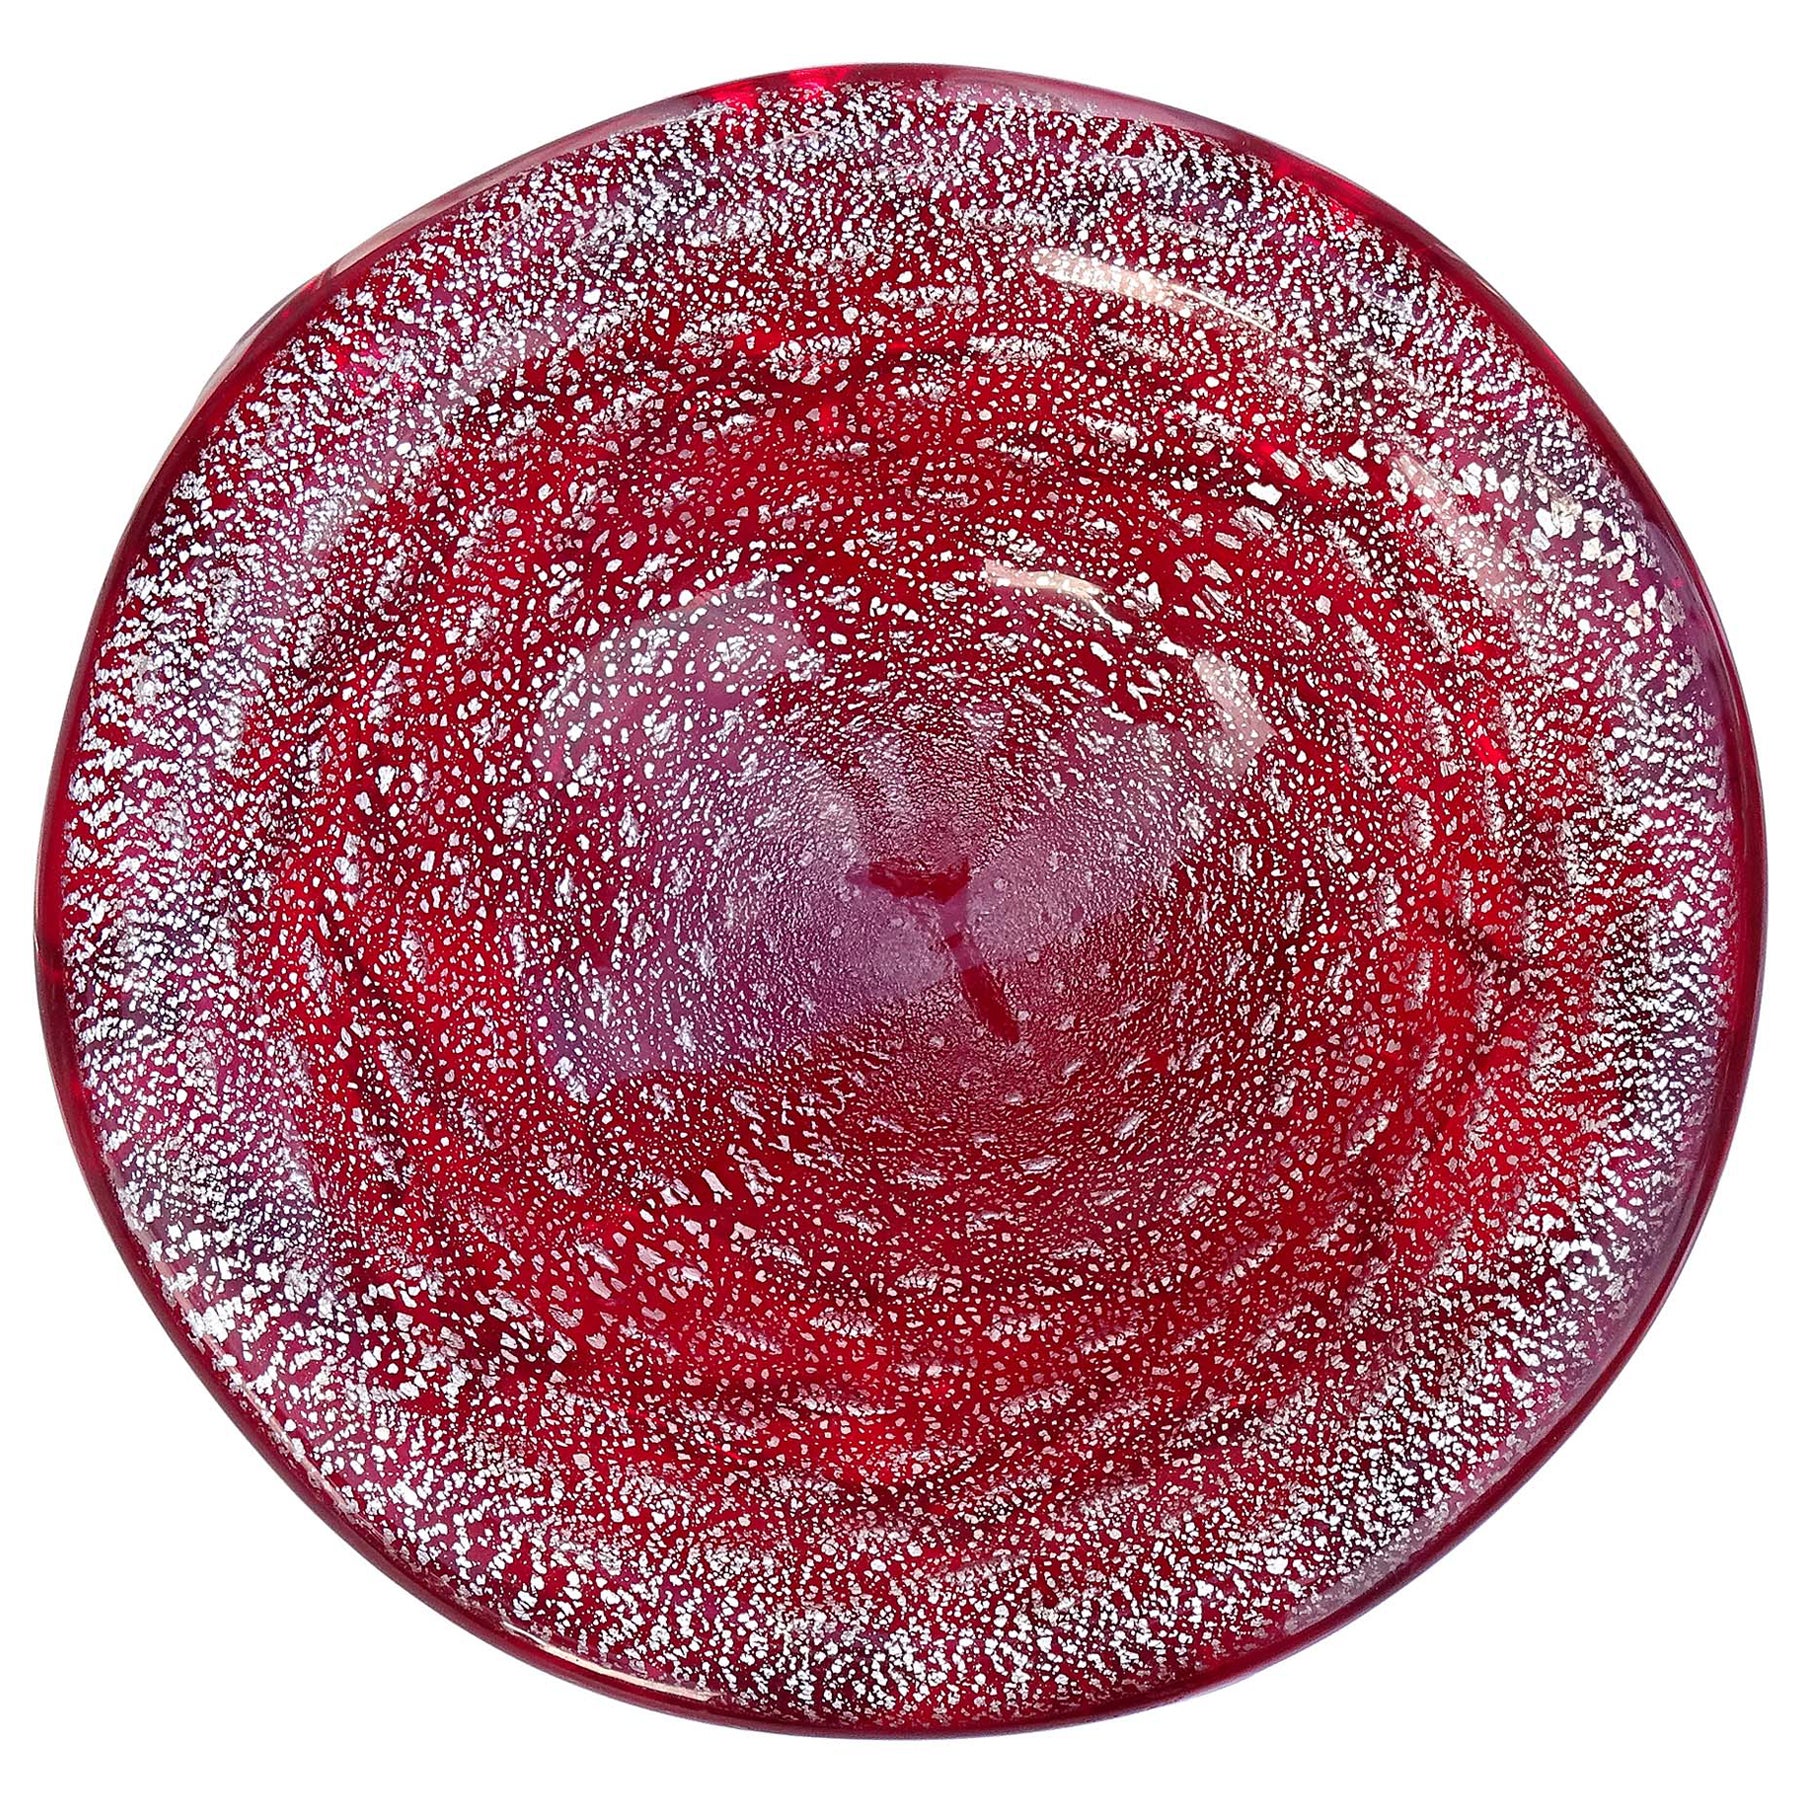 A.Ve.M. Radi Murano Red Silver Fleck Italian Art Glass Sculptural Surface Bowl For Sale